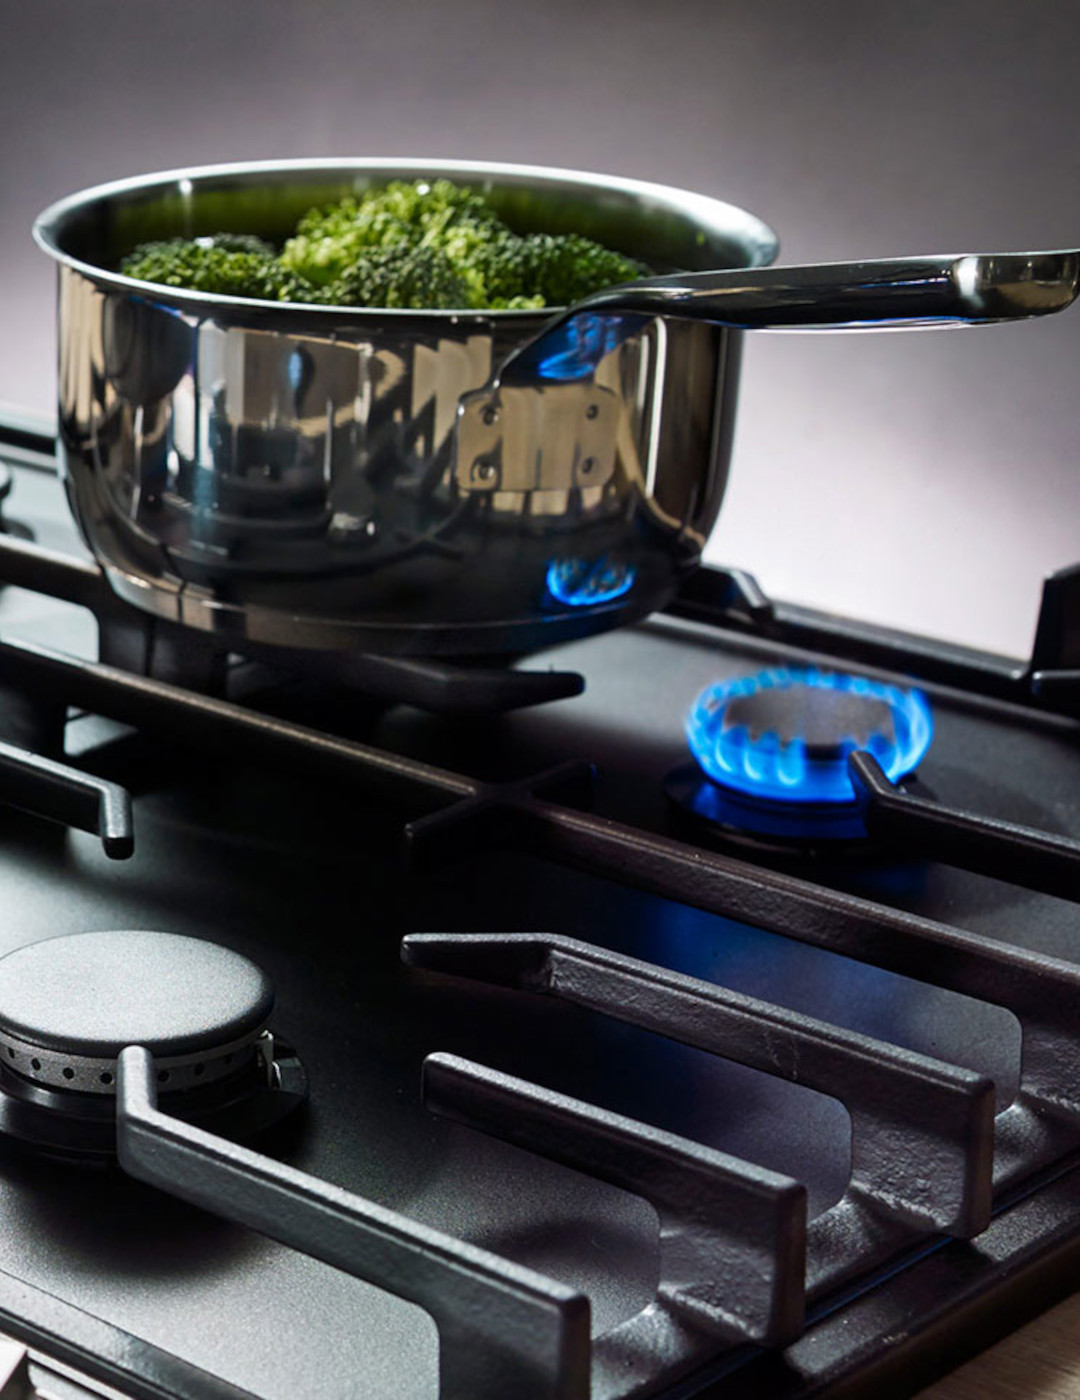 ASKO-Kitchen-Hobs-Cook-tops-Explore-the-features-in-ASKO-hobs-2-mobile.jpg